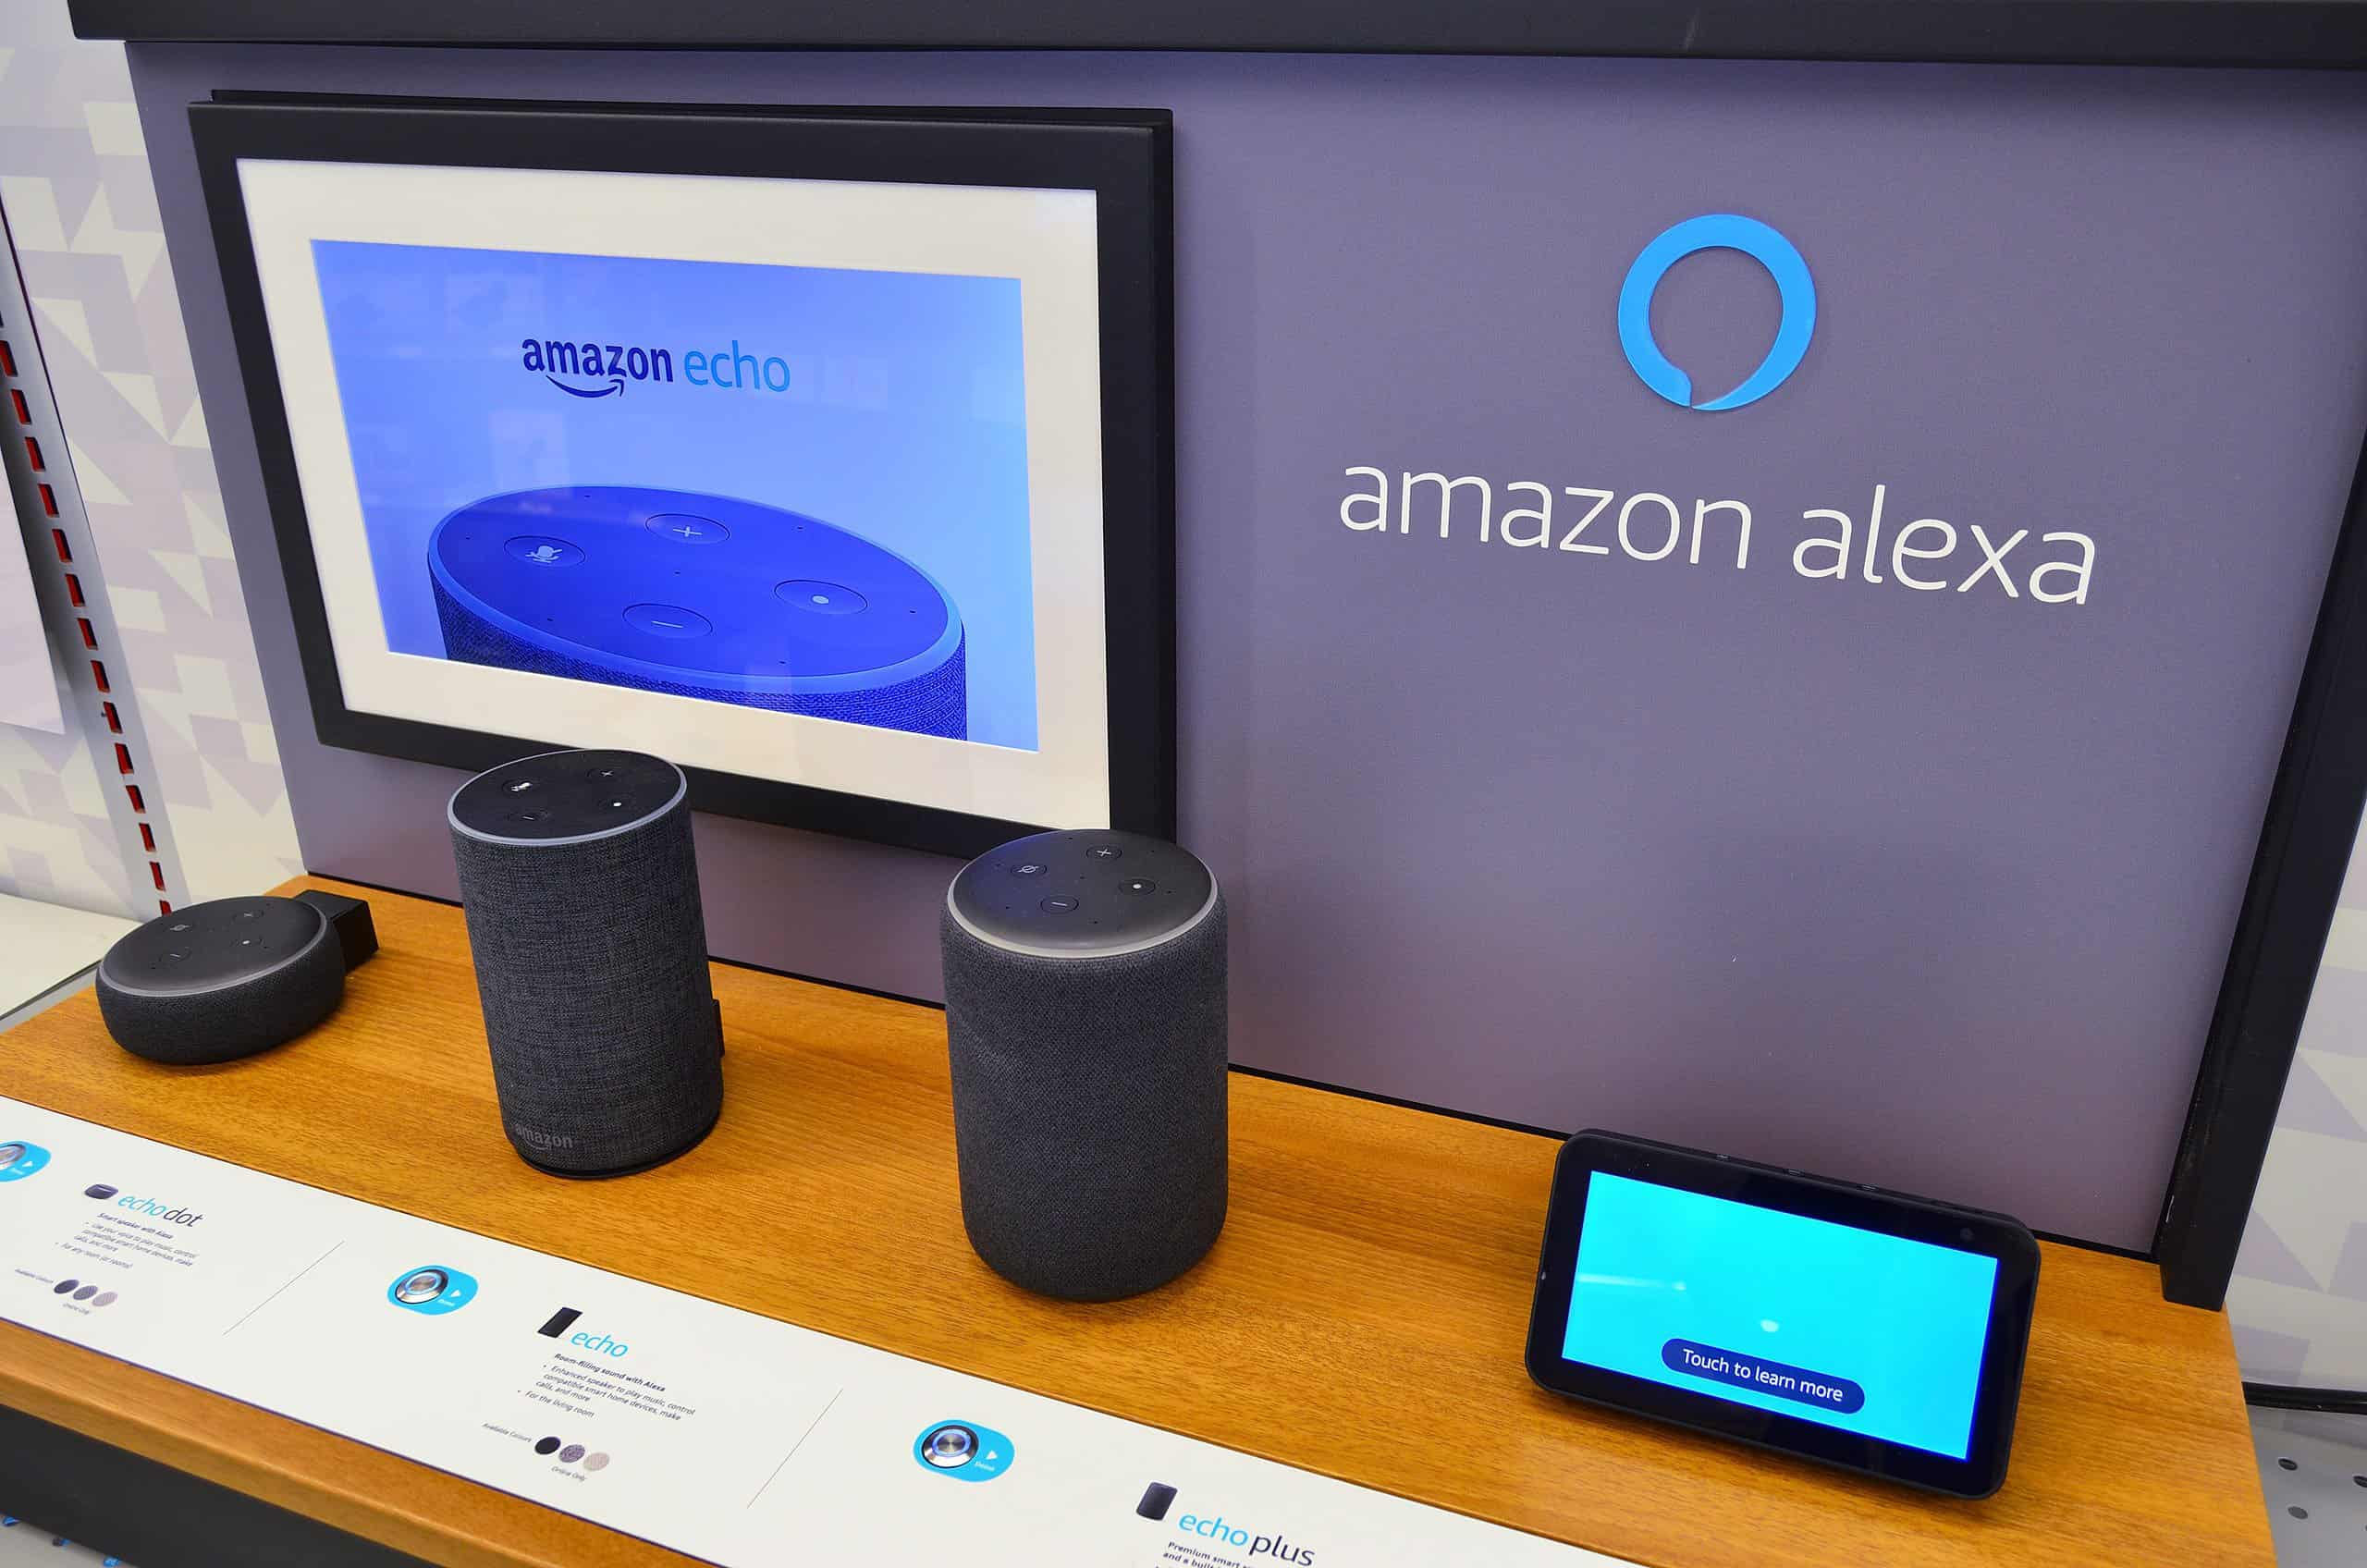 How To Install Amazon Echo With Windows